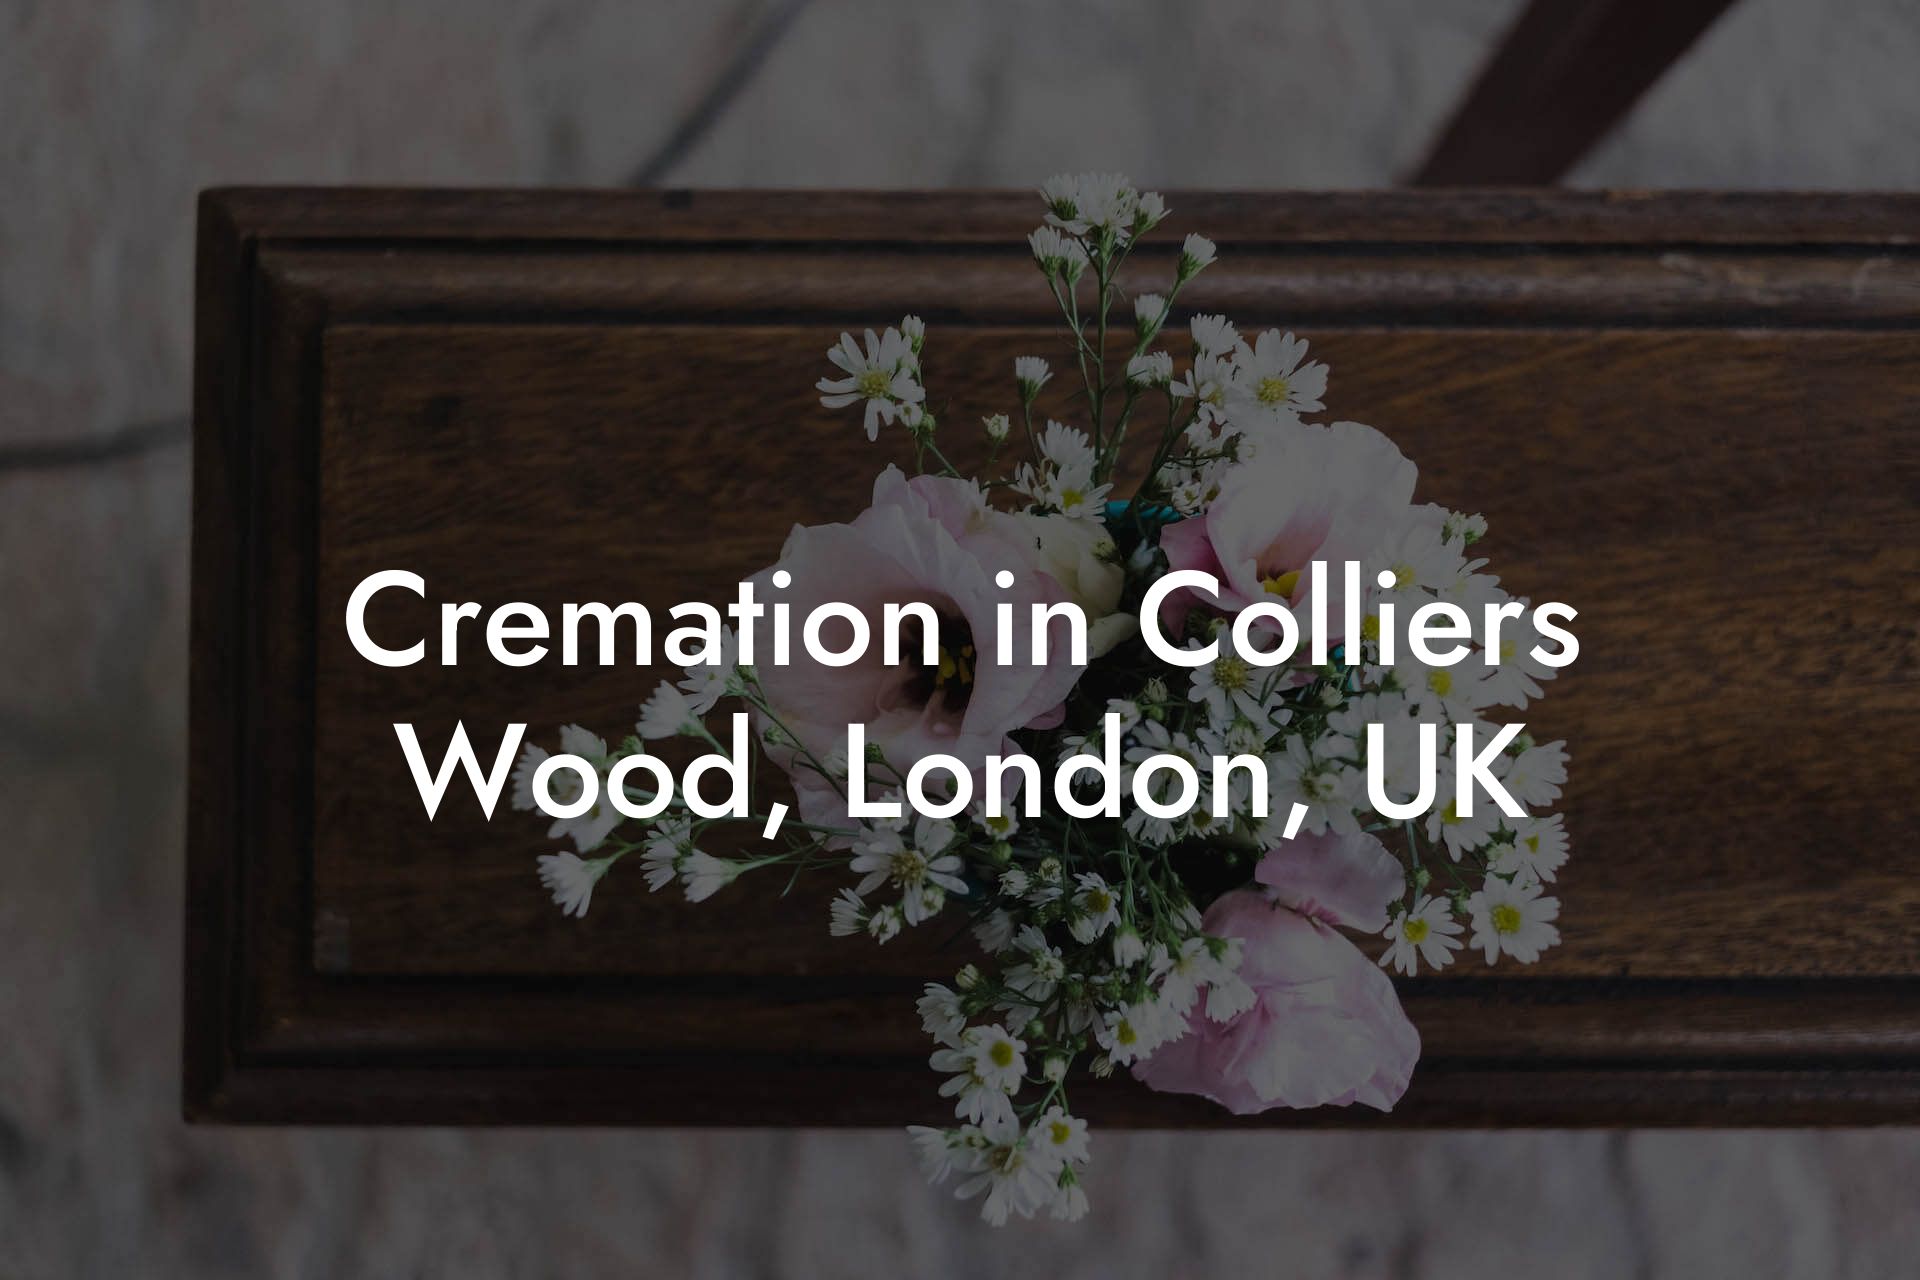 Cremation in Colliers Wood, London, UK